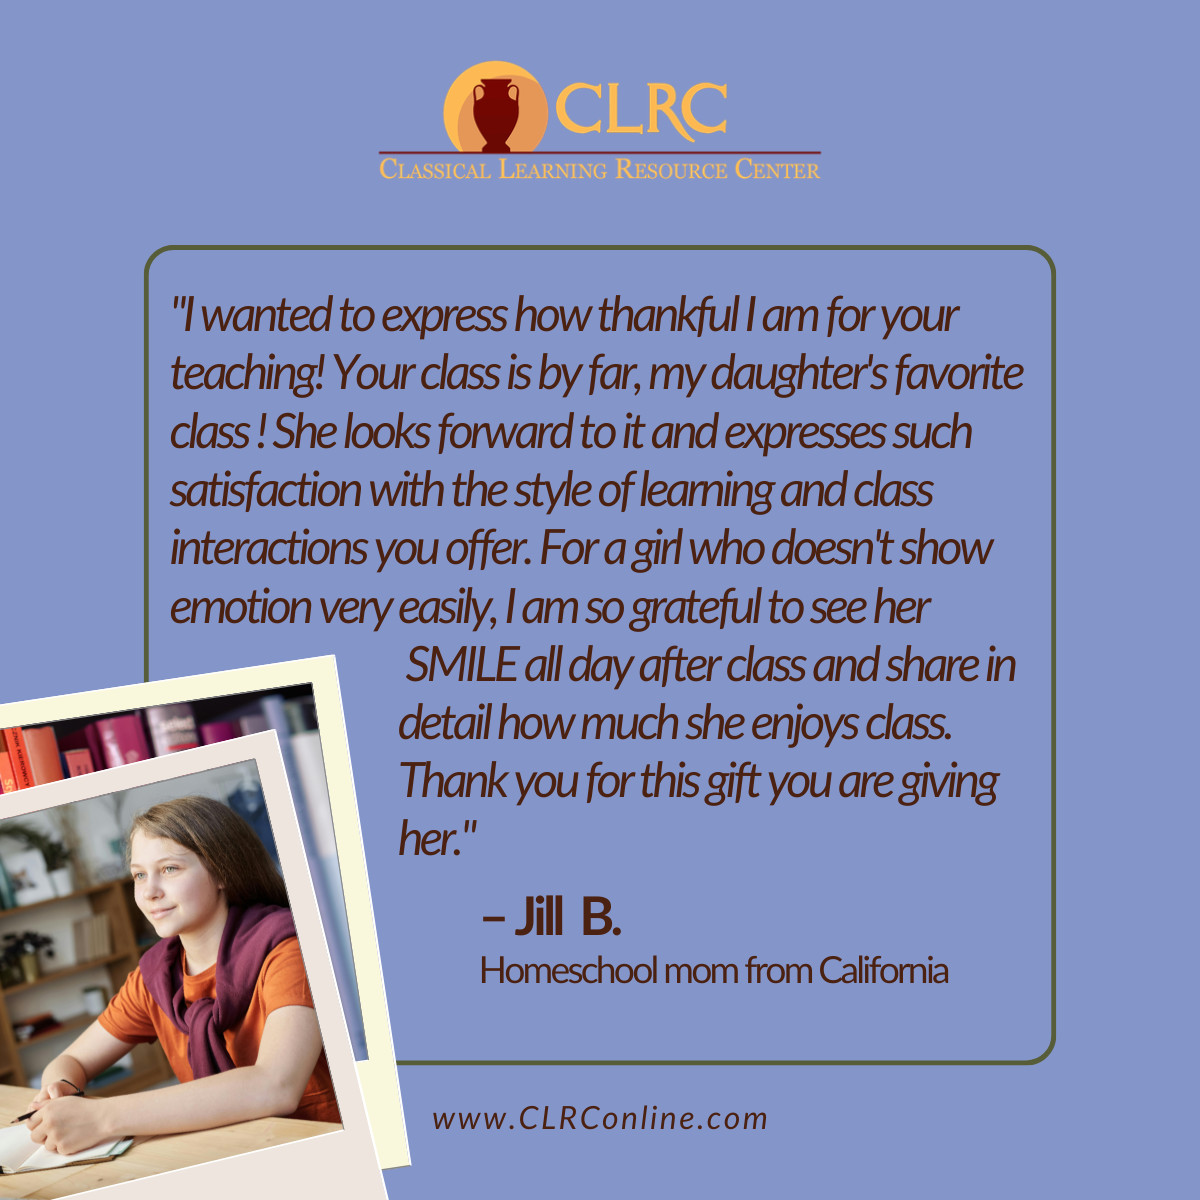 'I wanted to express how thankful I am for your teaching! Your class is by far my daughter's favorite! I am so grateful to see her SMILE all day after class & share how much she enjoys class. Thank you for this gift you are giving her.' - Jill, CA #homeschool #classicaleducation